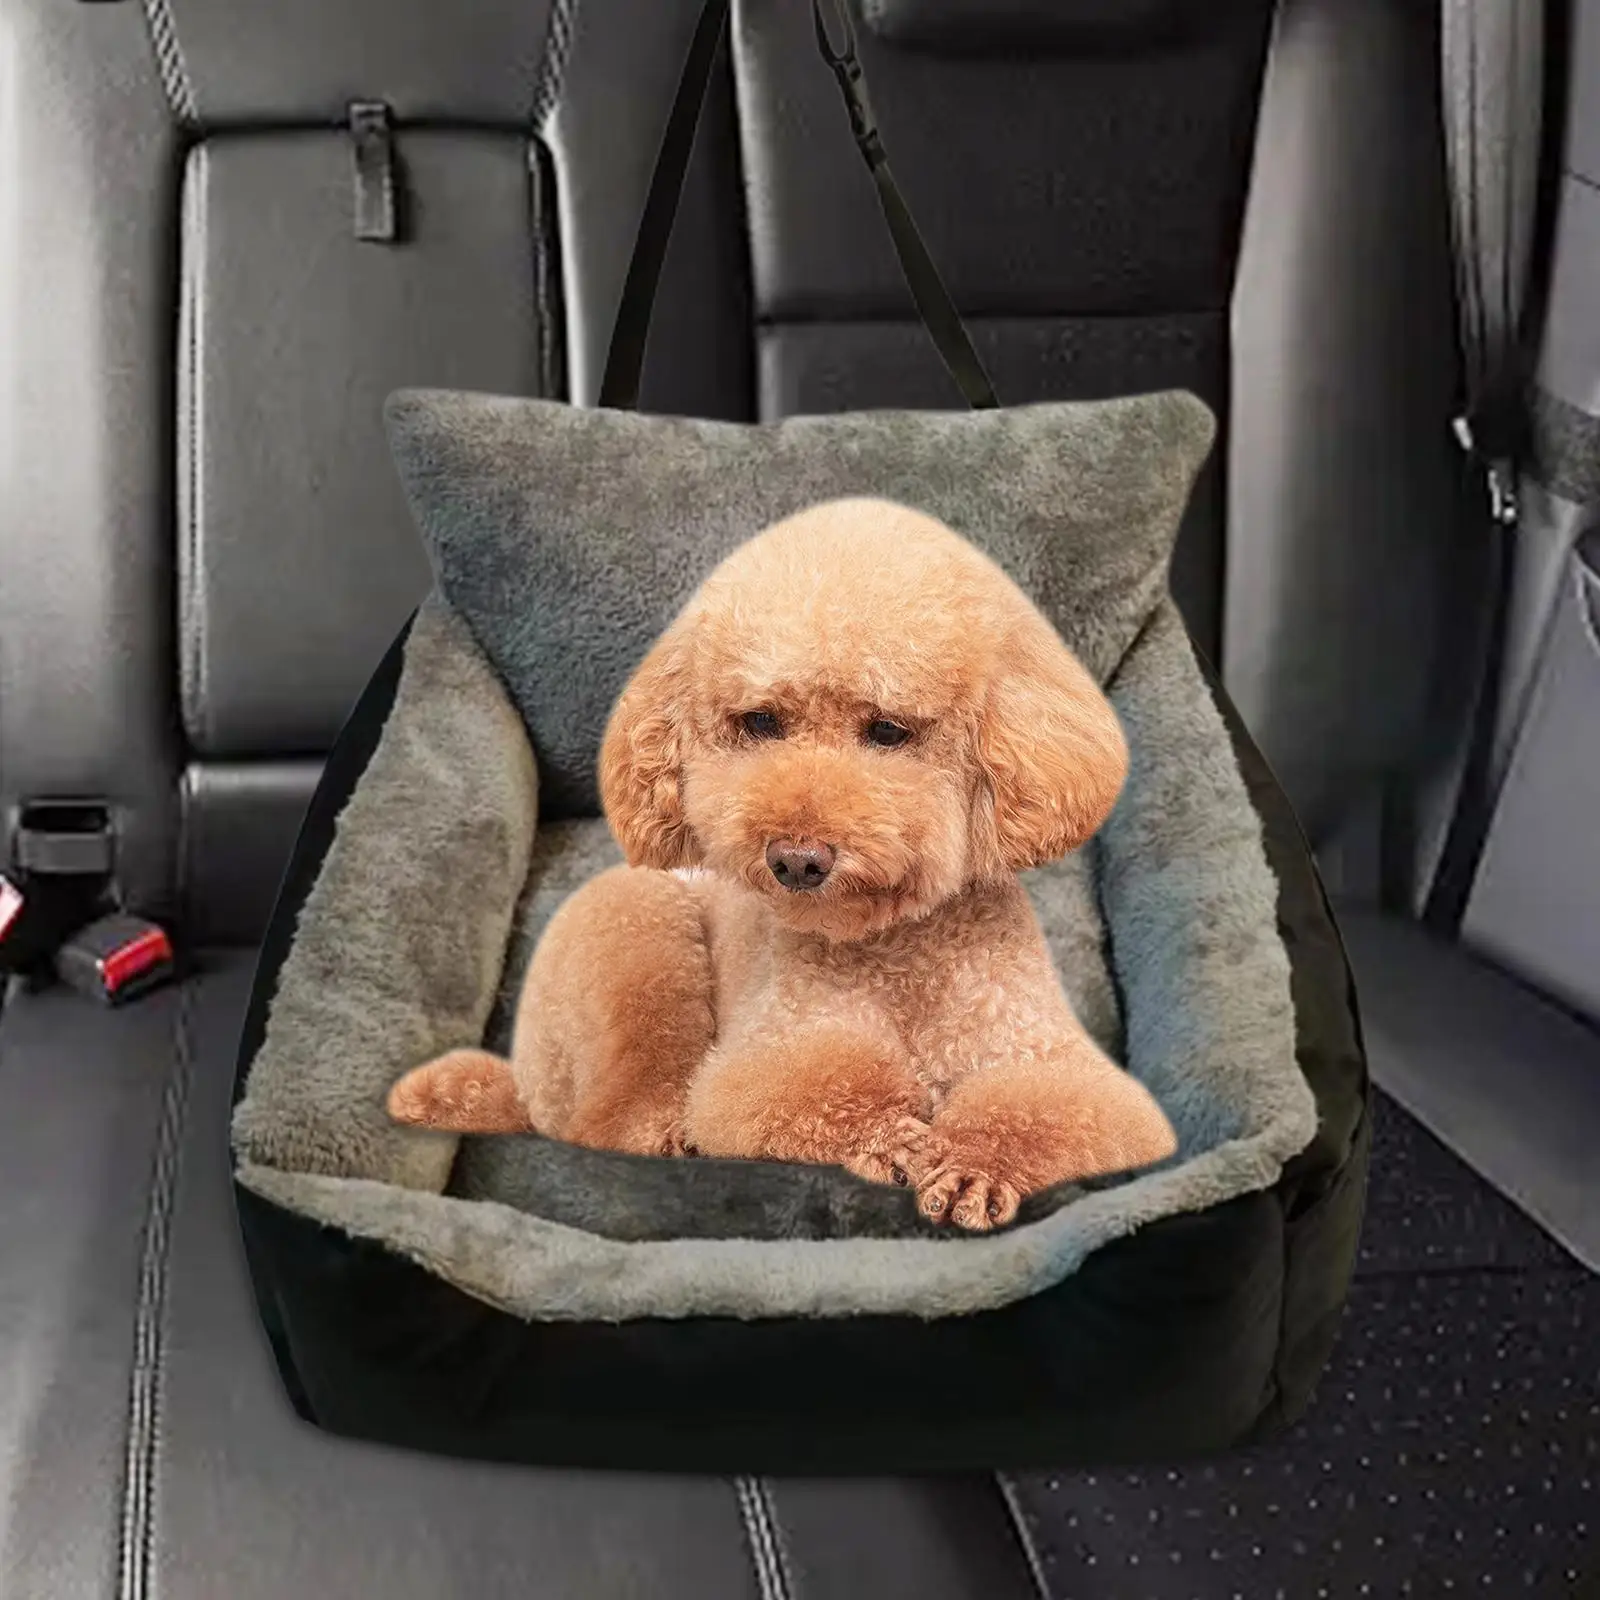 Dog Car Seat Booster Seat Detachable Booster Seat Dog Car Travel Carrier Bed Car Travel Bed for Kitten Small Medium Dogs